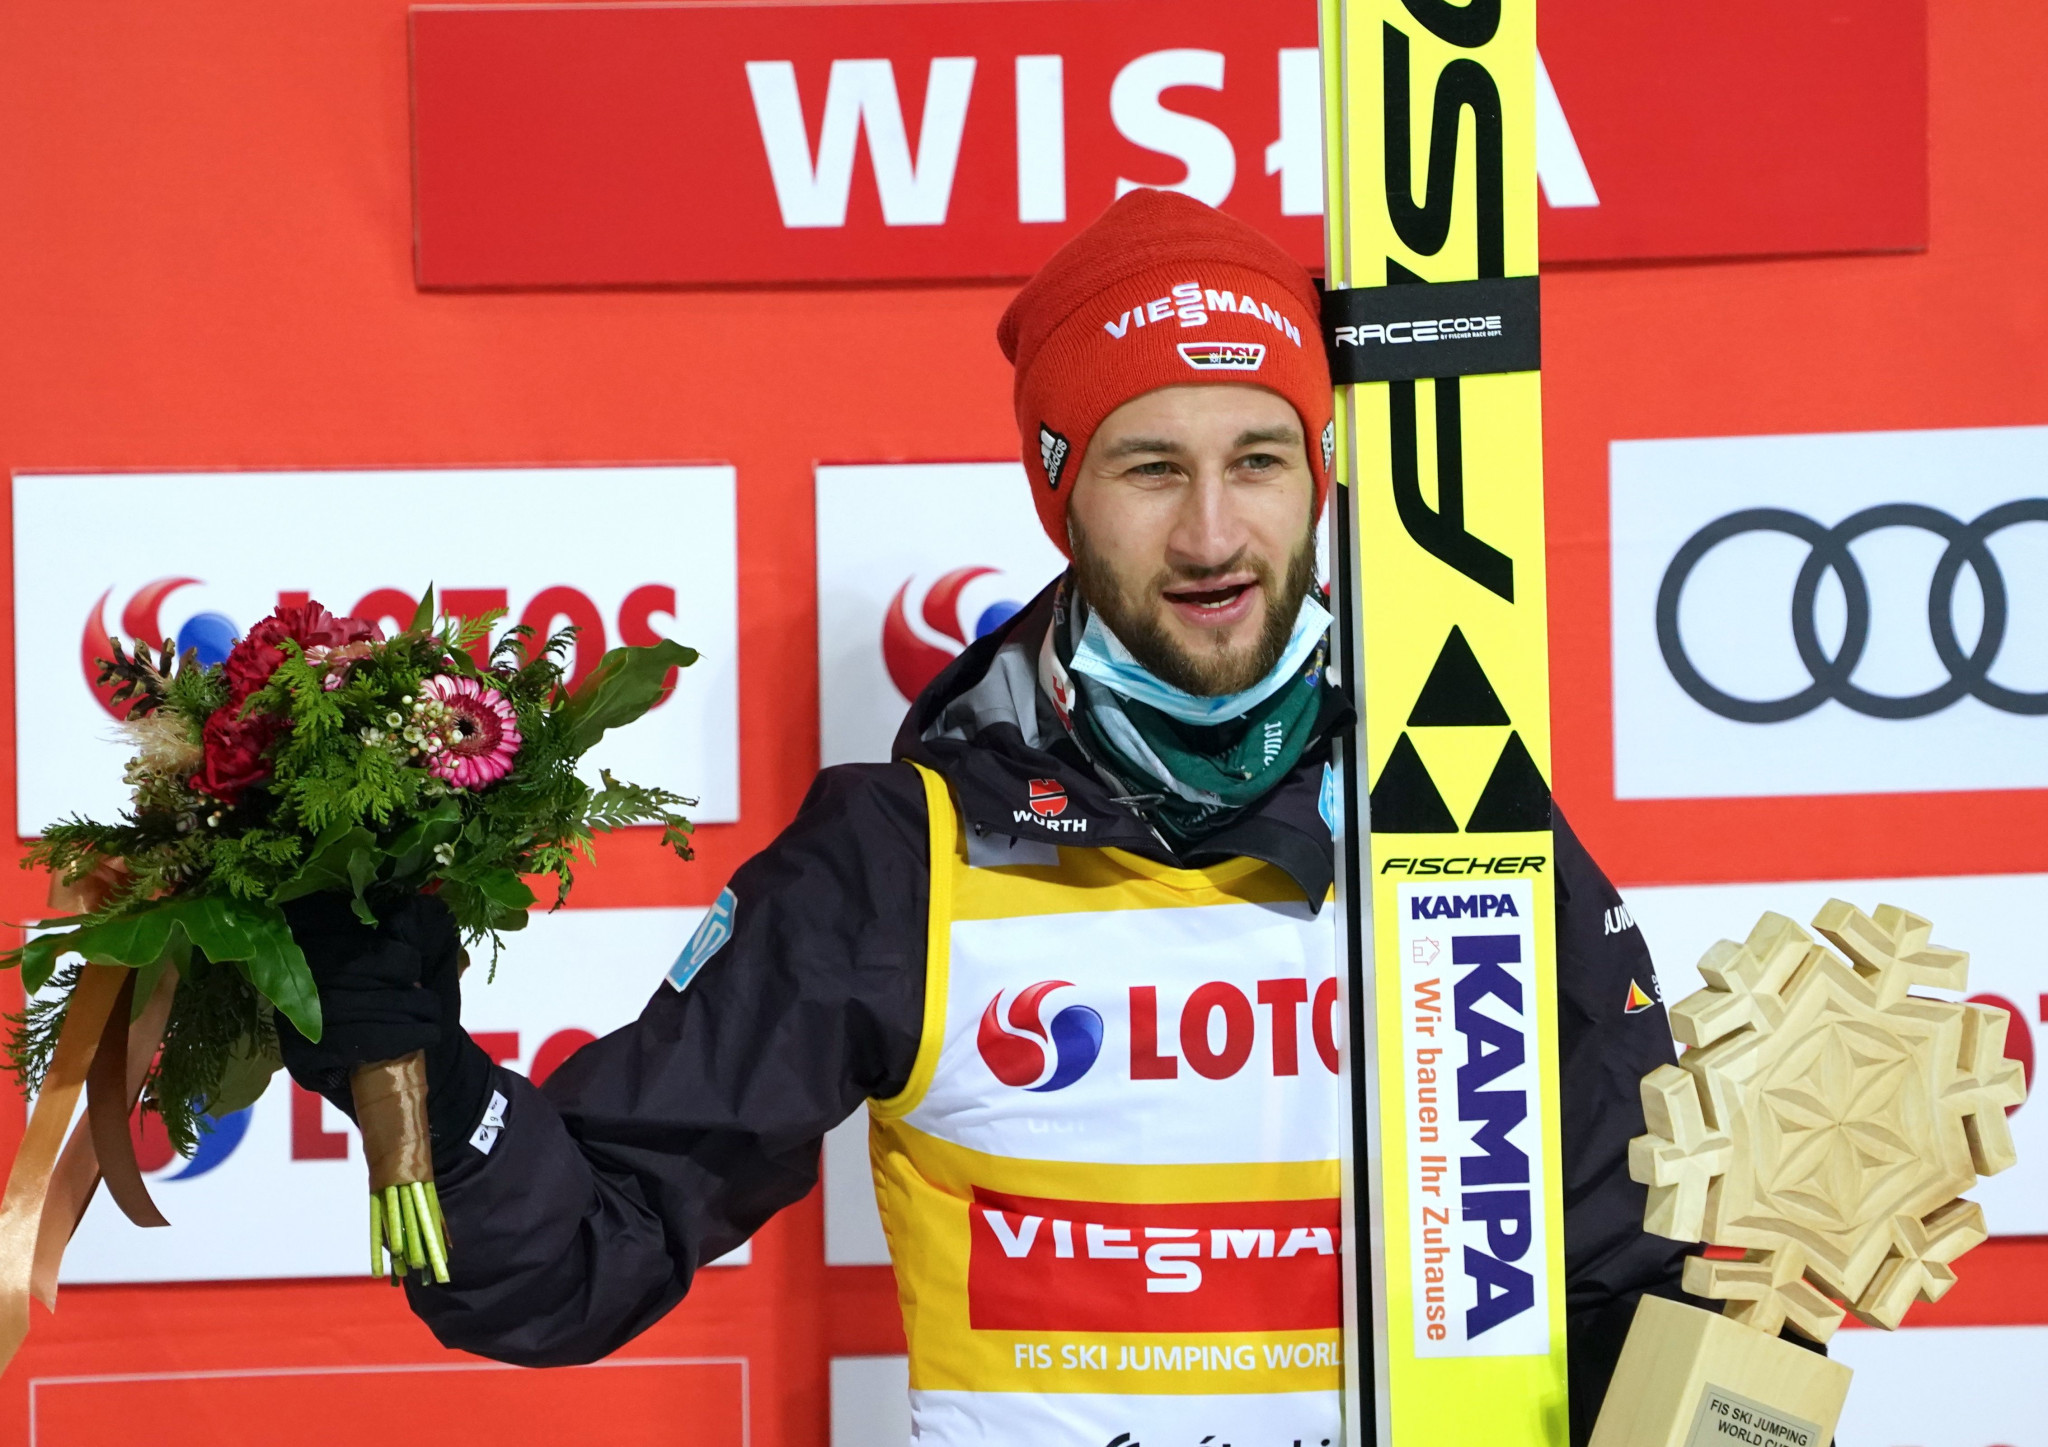 Markus Eisenbichler was the victor at the FIS Ski Jumping World Cup individual contest in Wisla ©Getty Images